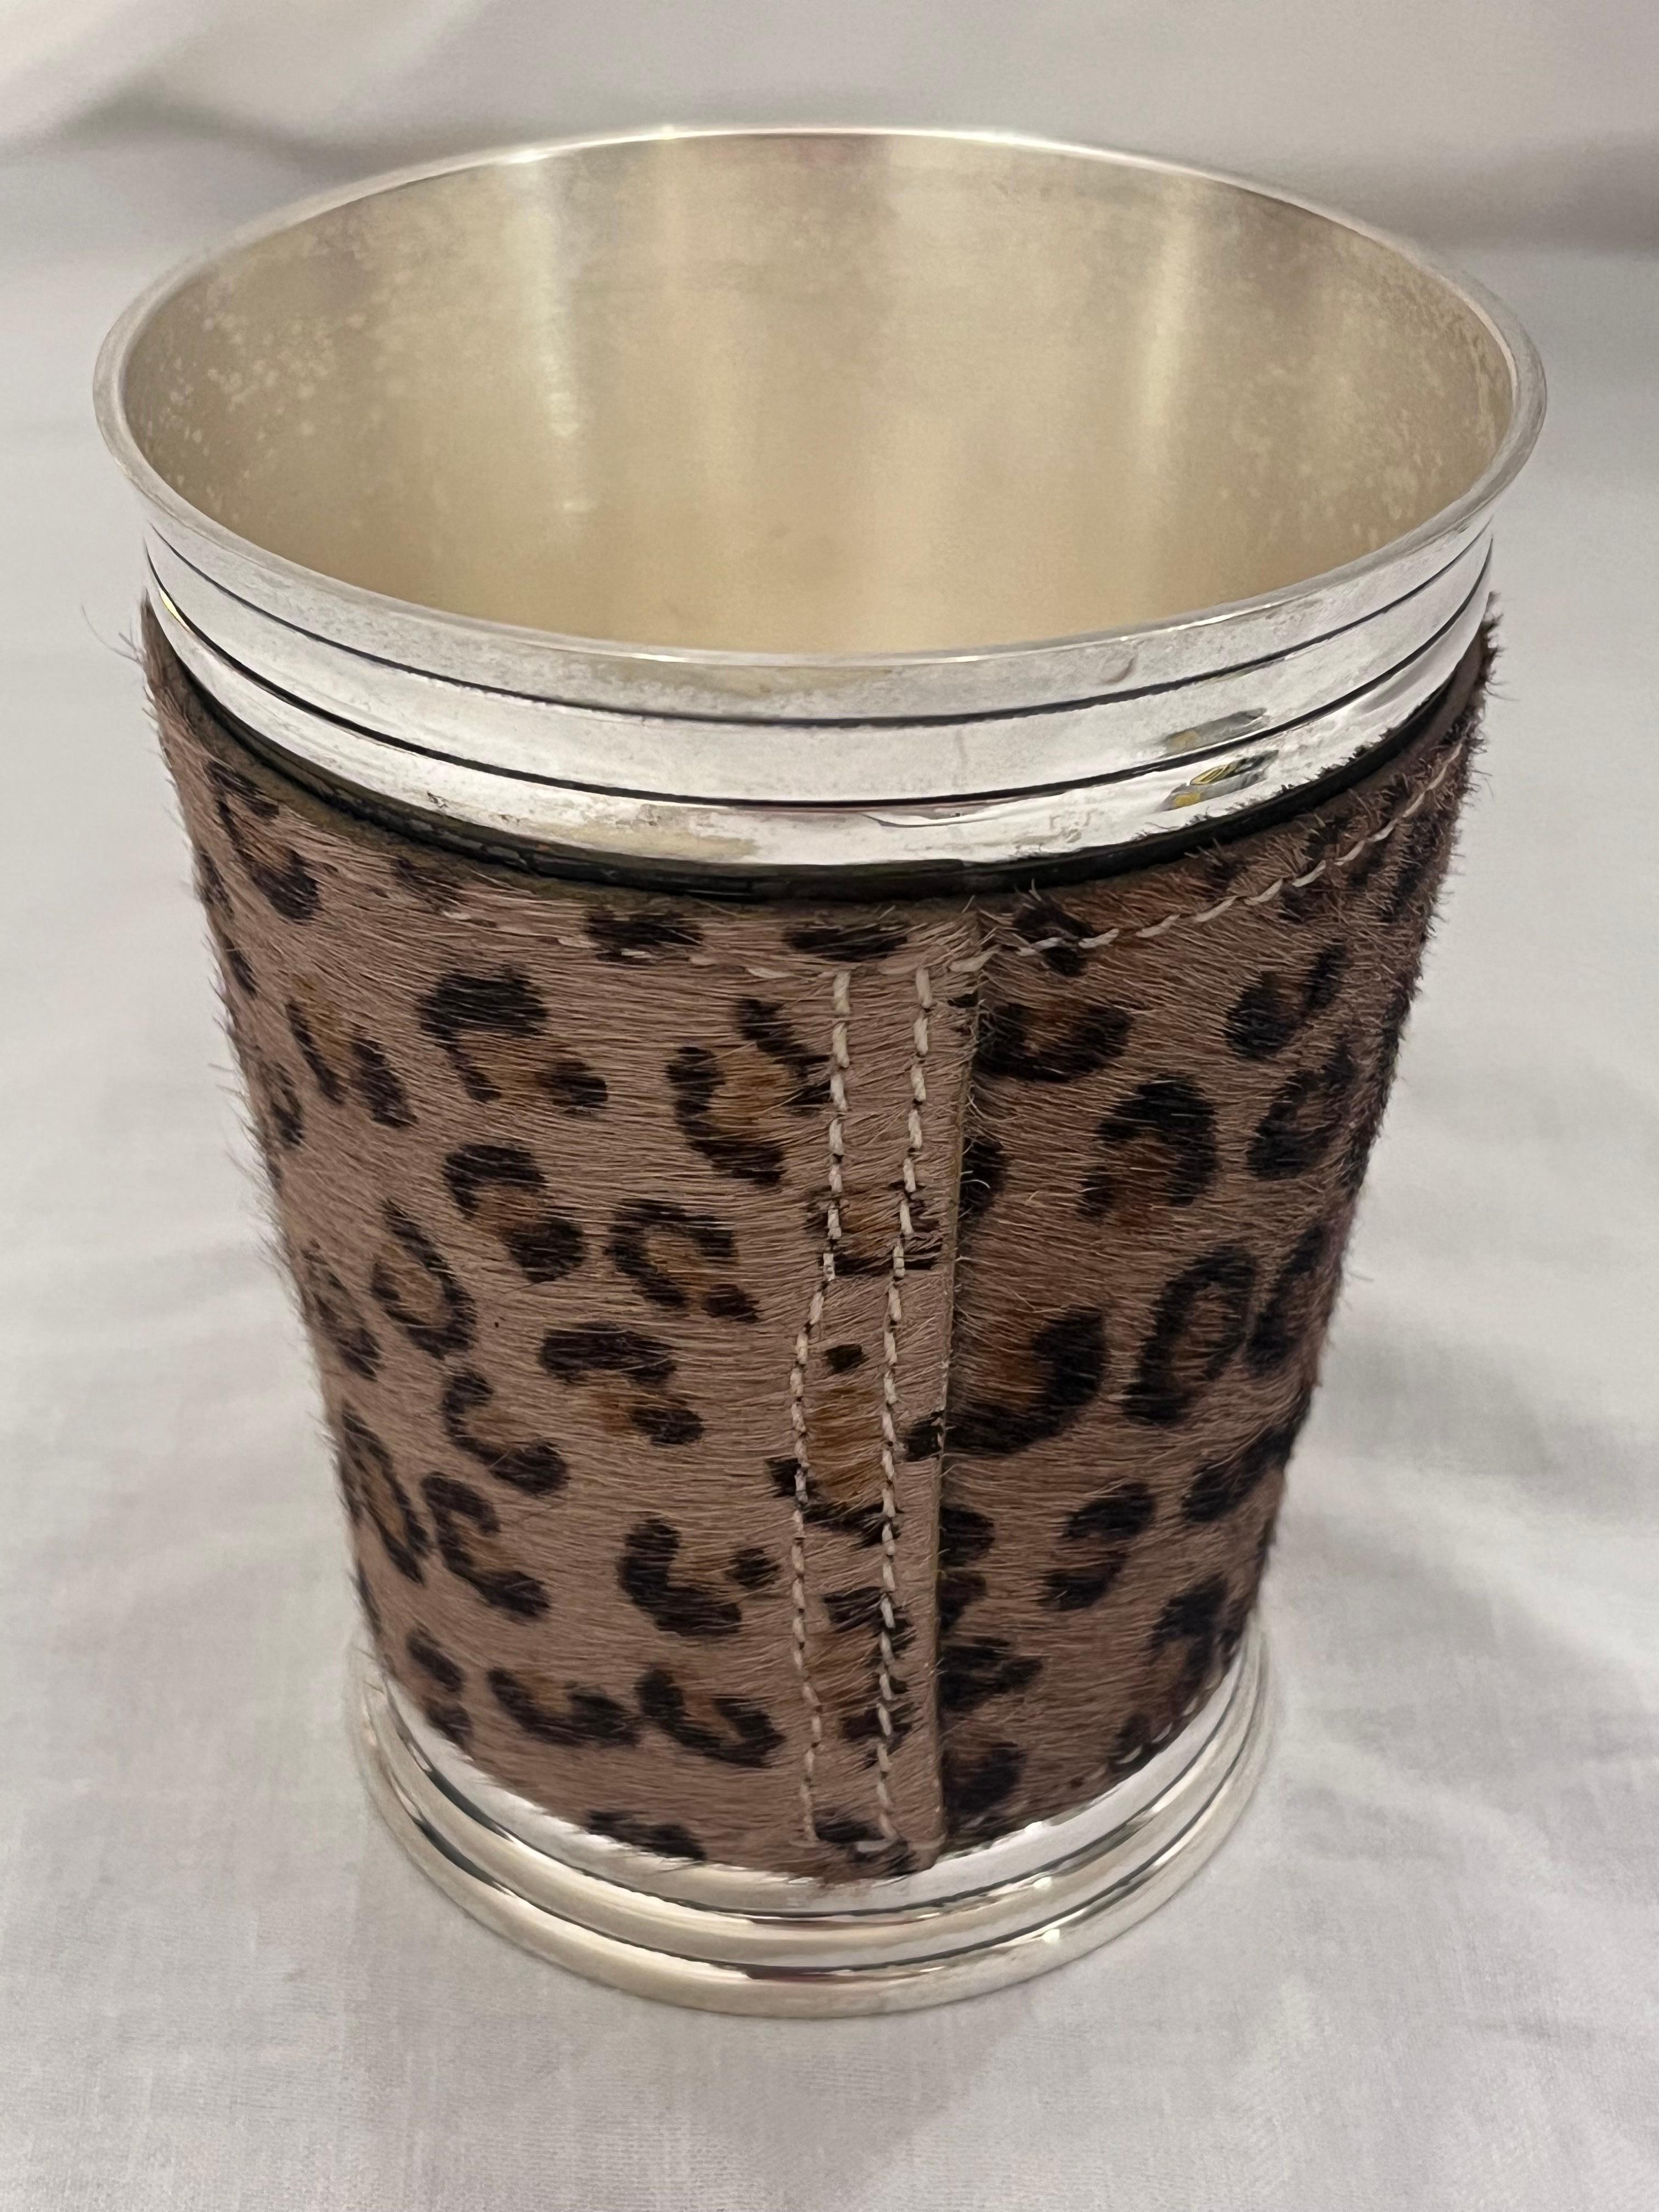 A striking, bold and hefty silvered metal beaker or cup by Dominic Chambon Paris. The vessel features a faux fur leather wrap around the outside of the cup. The lip and foot are both tiered in a strong architectural style. The weight of the beaker